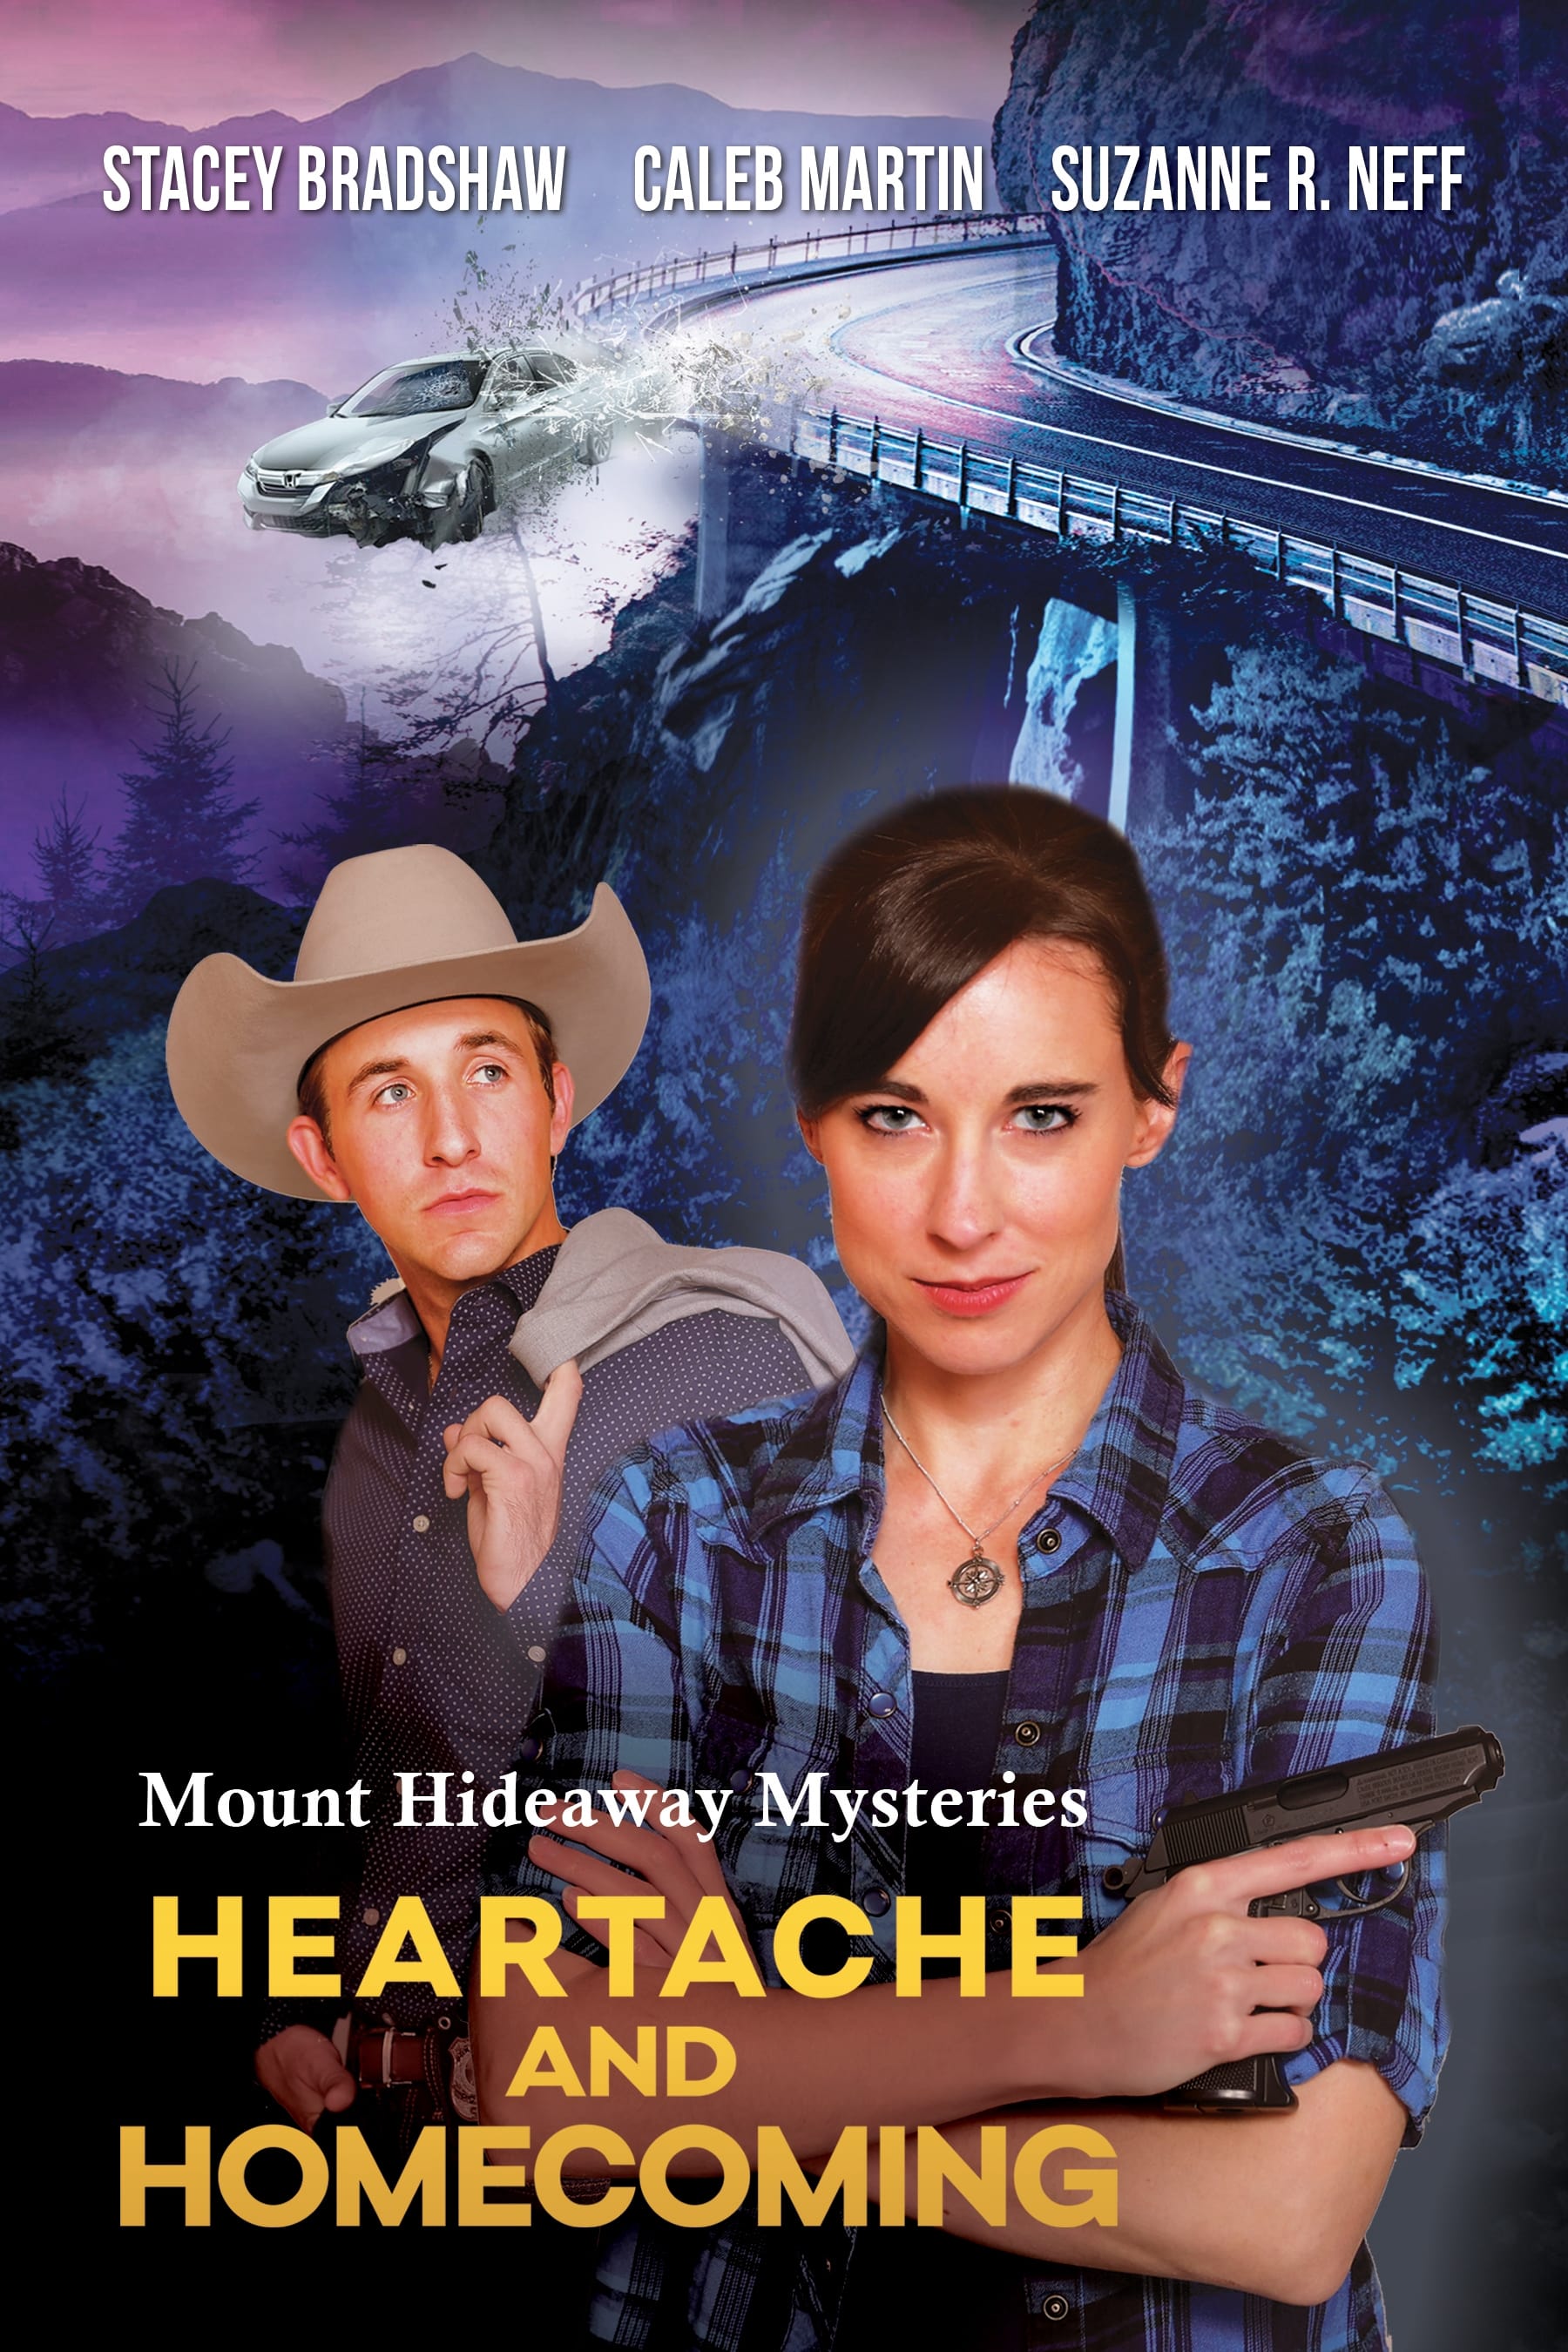 Mount Hideaway Mysteries: Heartache and Homecoming (2022) poster - Allmovieland.com